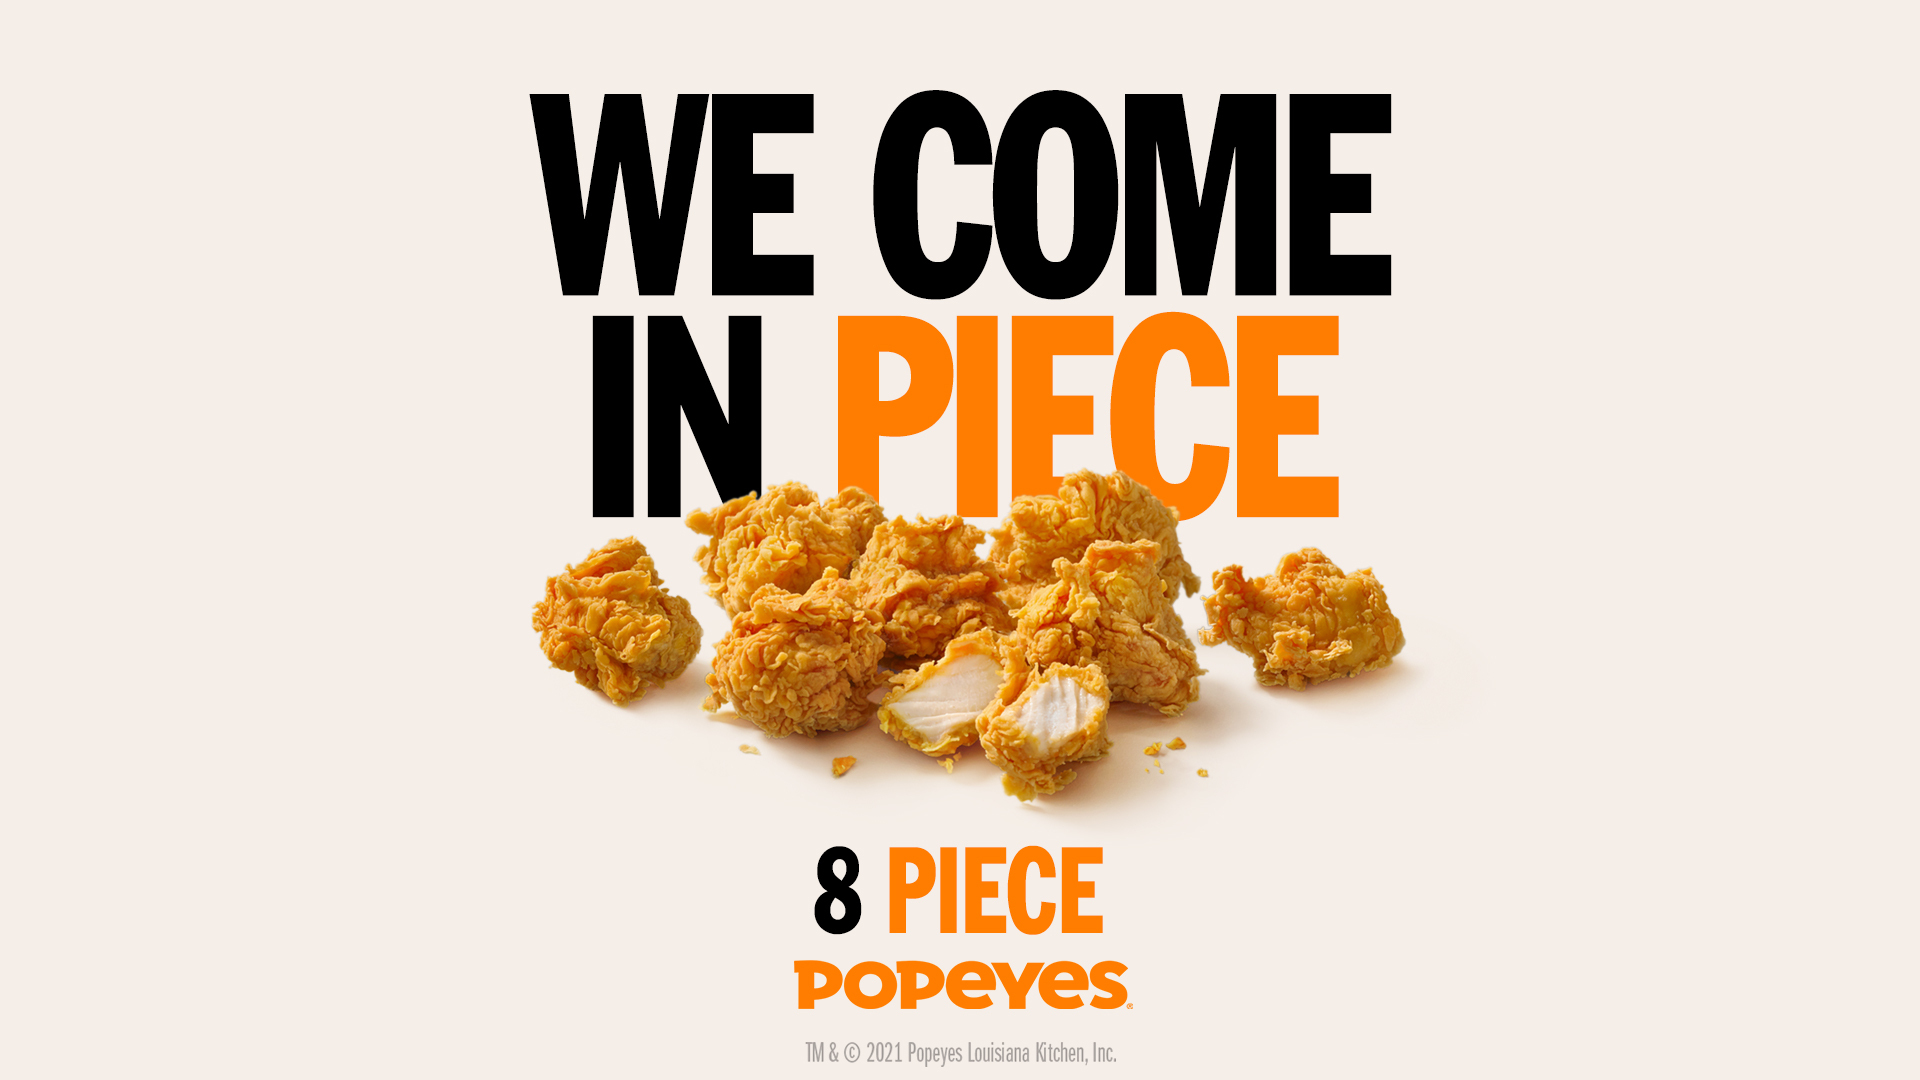 nuggets from popeyes